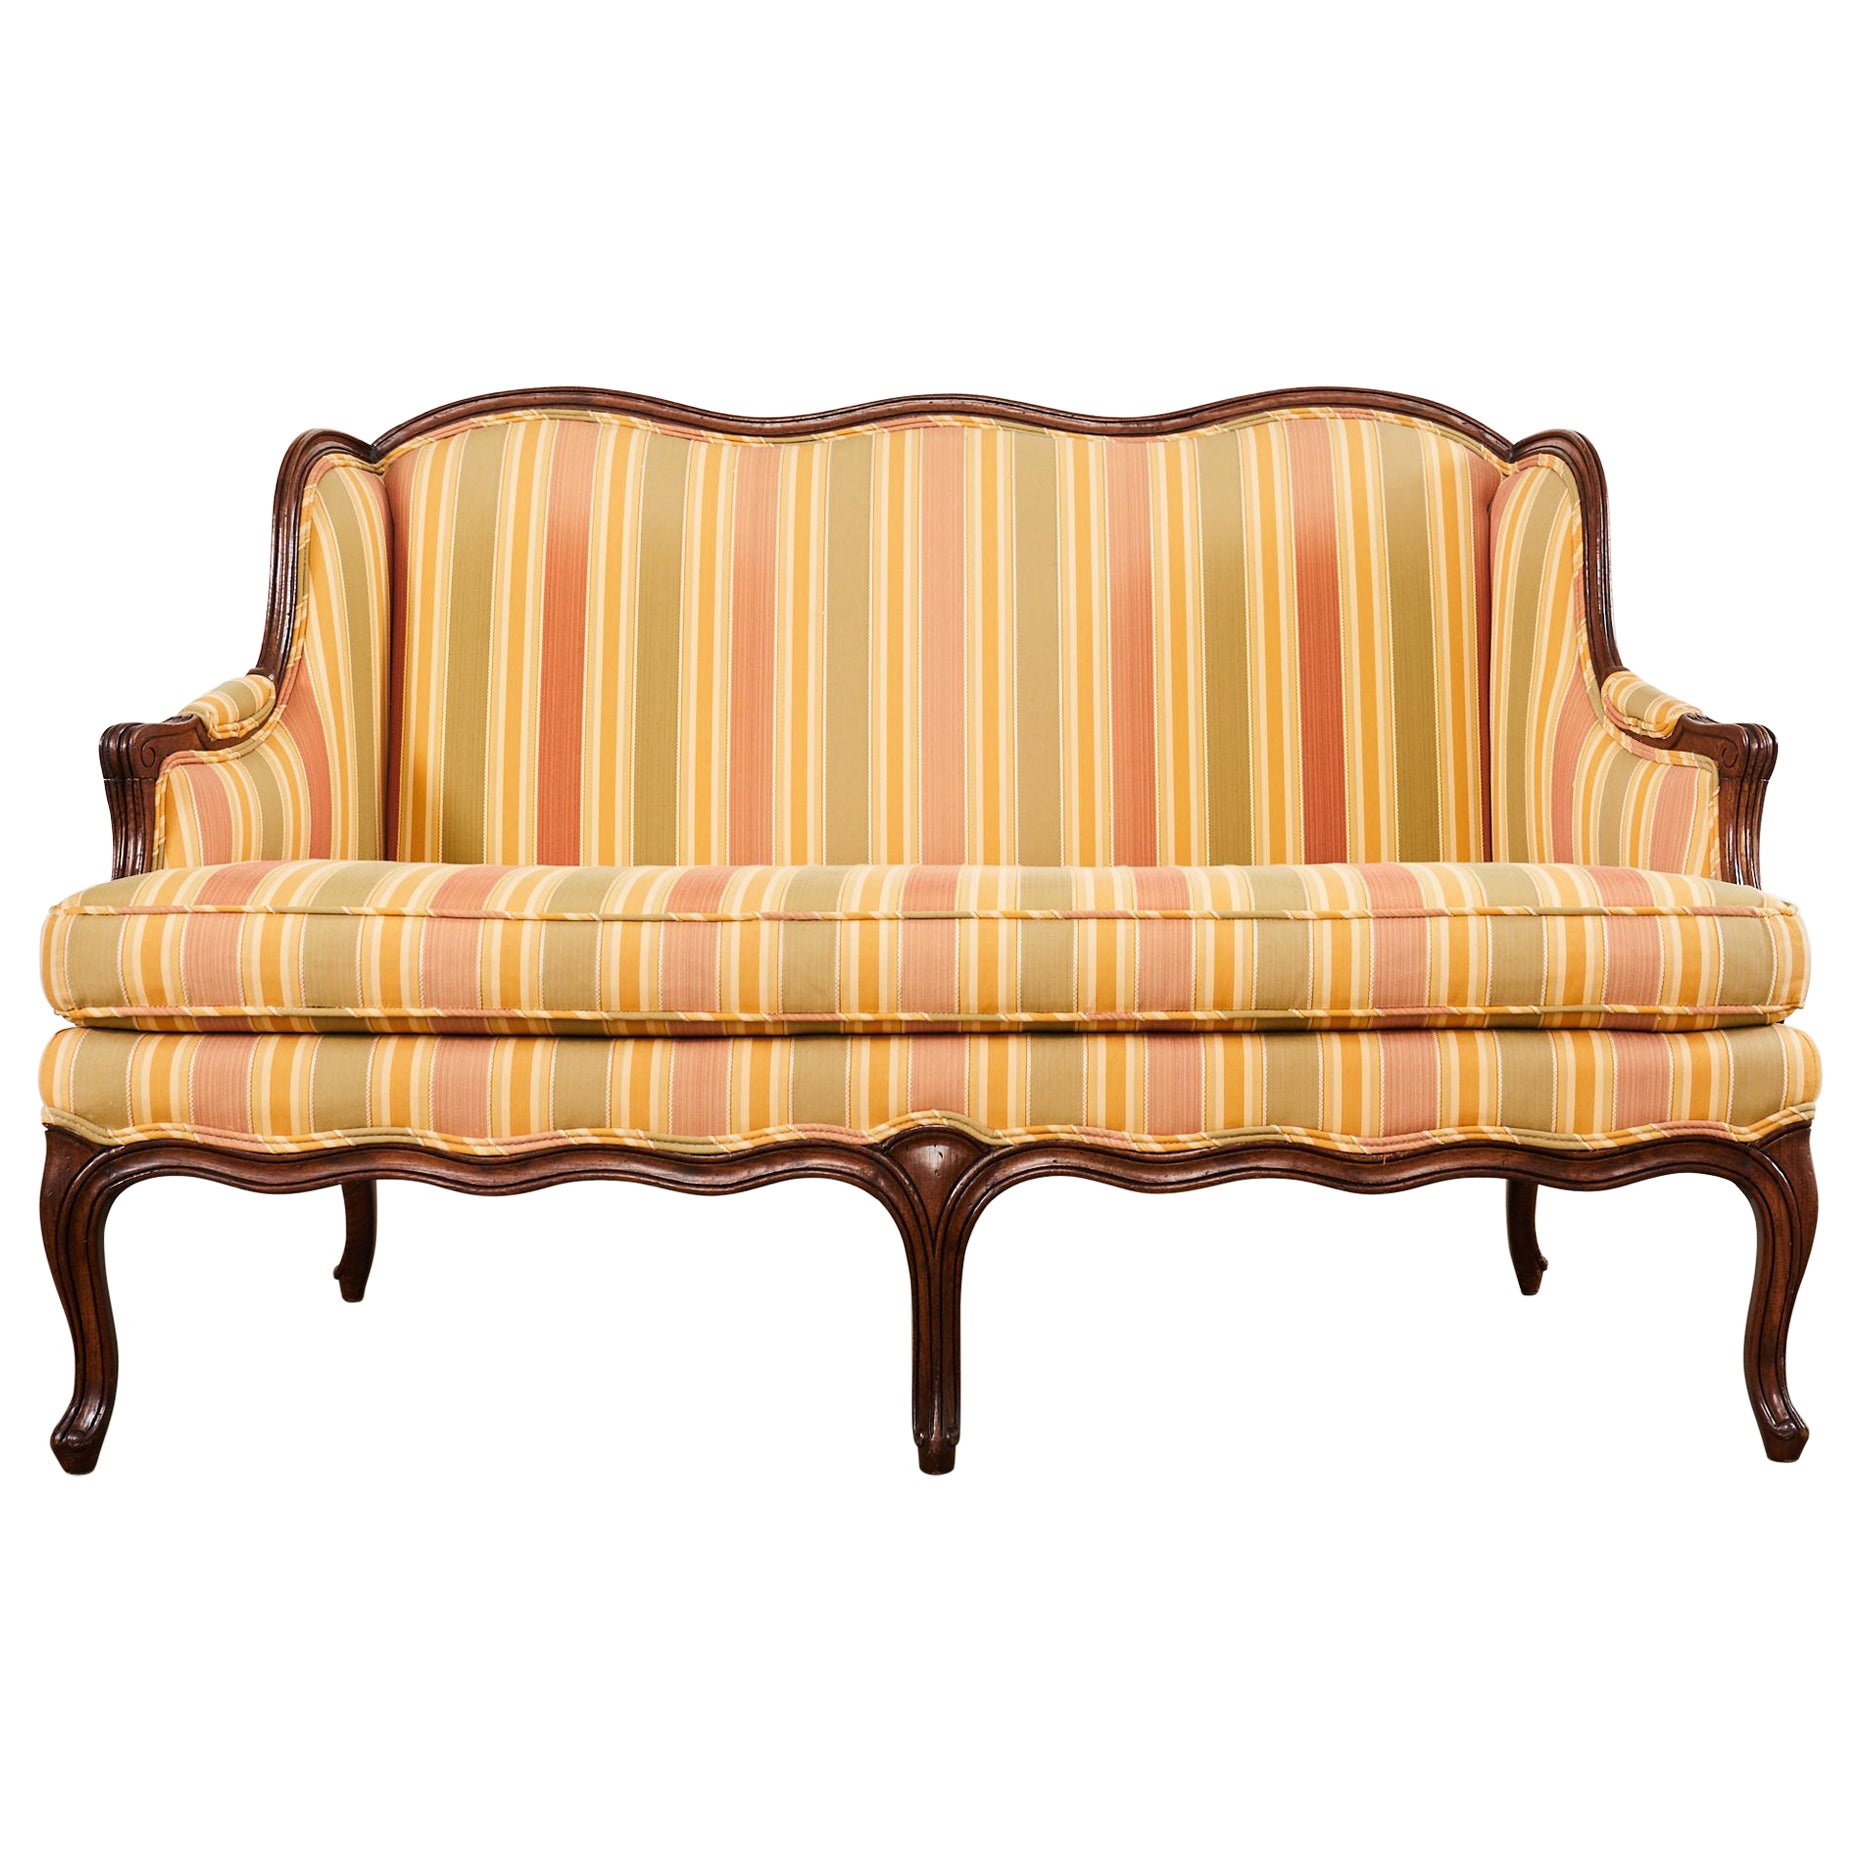 Country French Provincial Louis XV Style Serpentine Wingback Settee For Sale